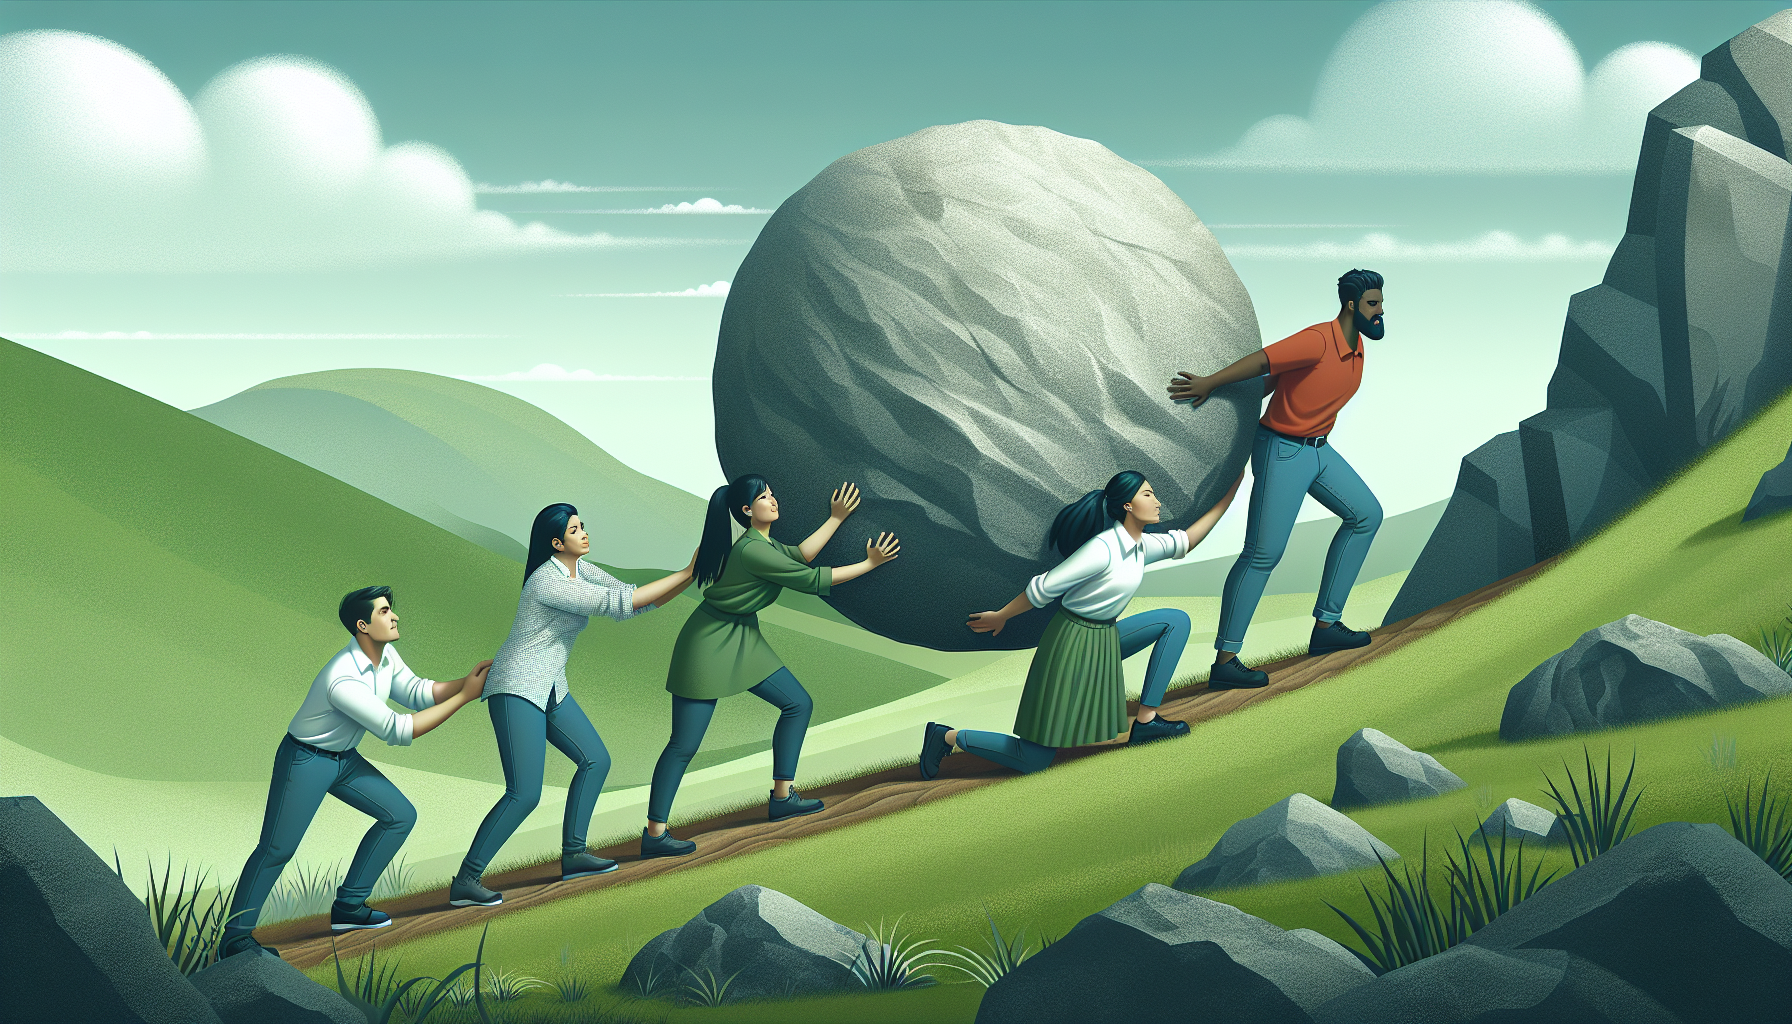 Illustration of a team overcoming challenges and embracing change